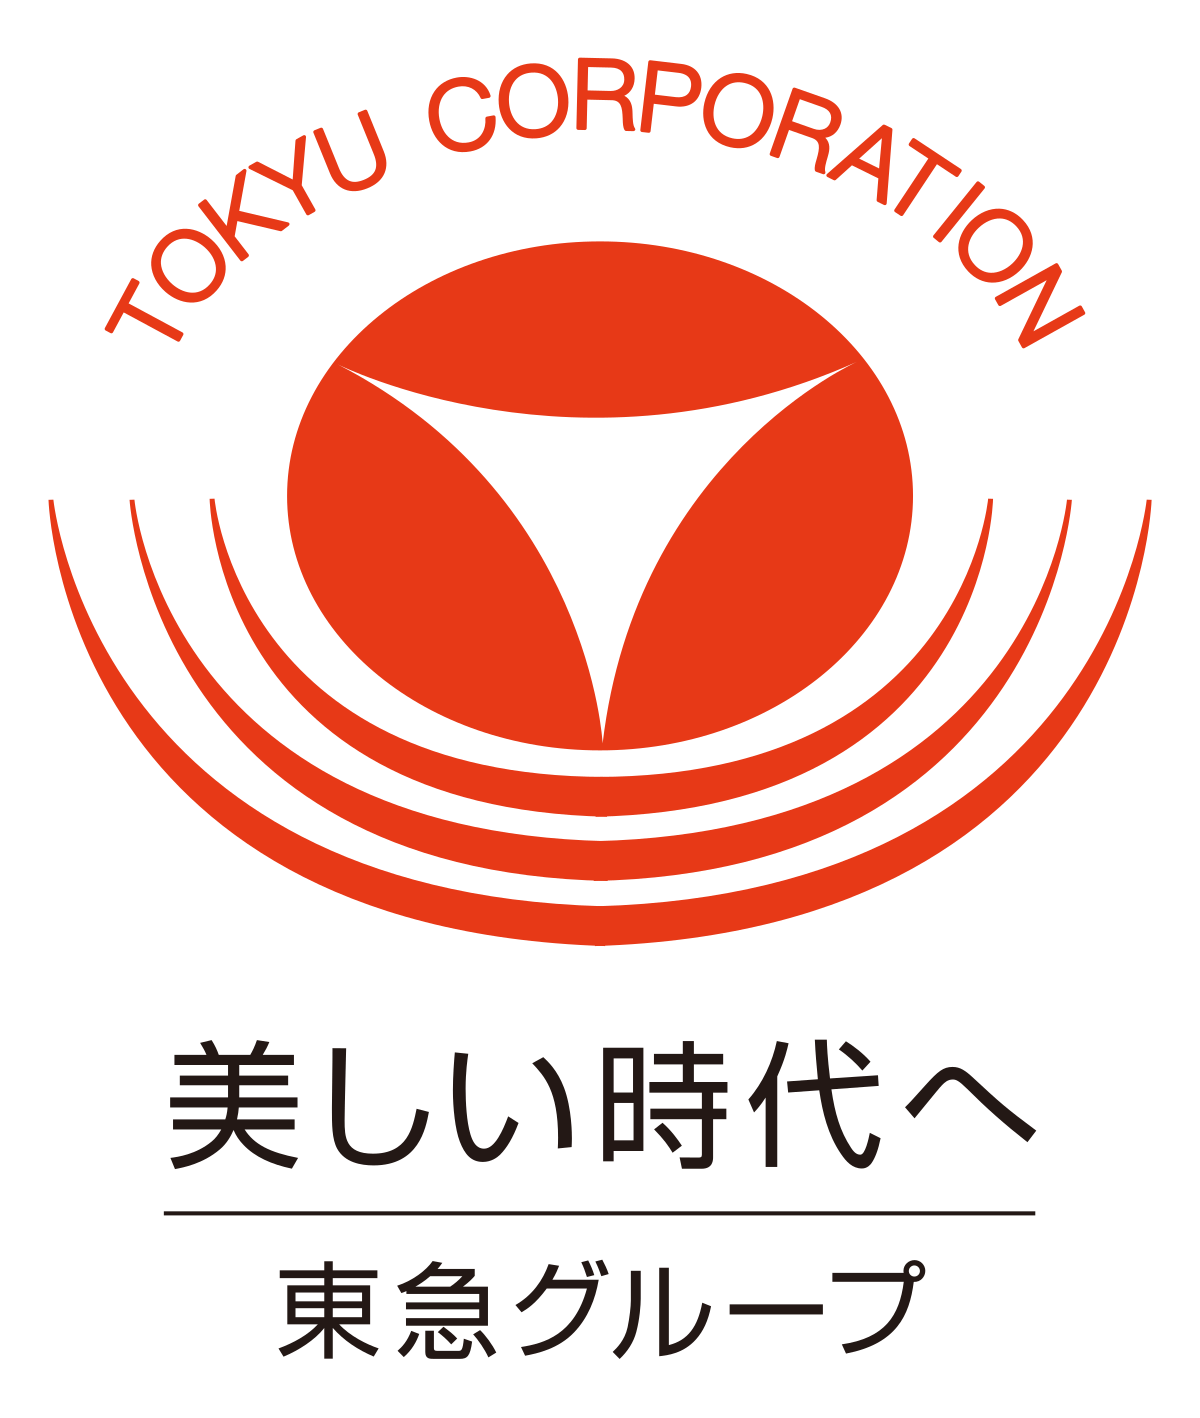 Logo of Tokyu Corporation one of our partners